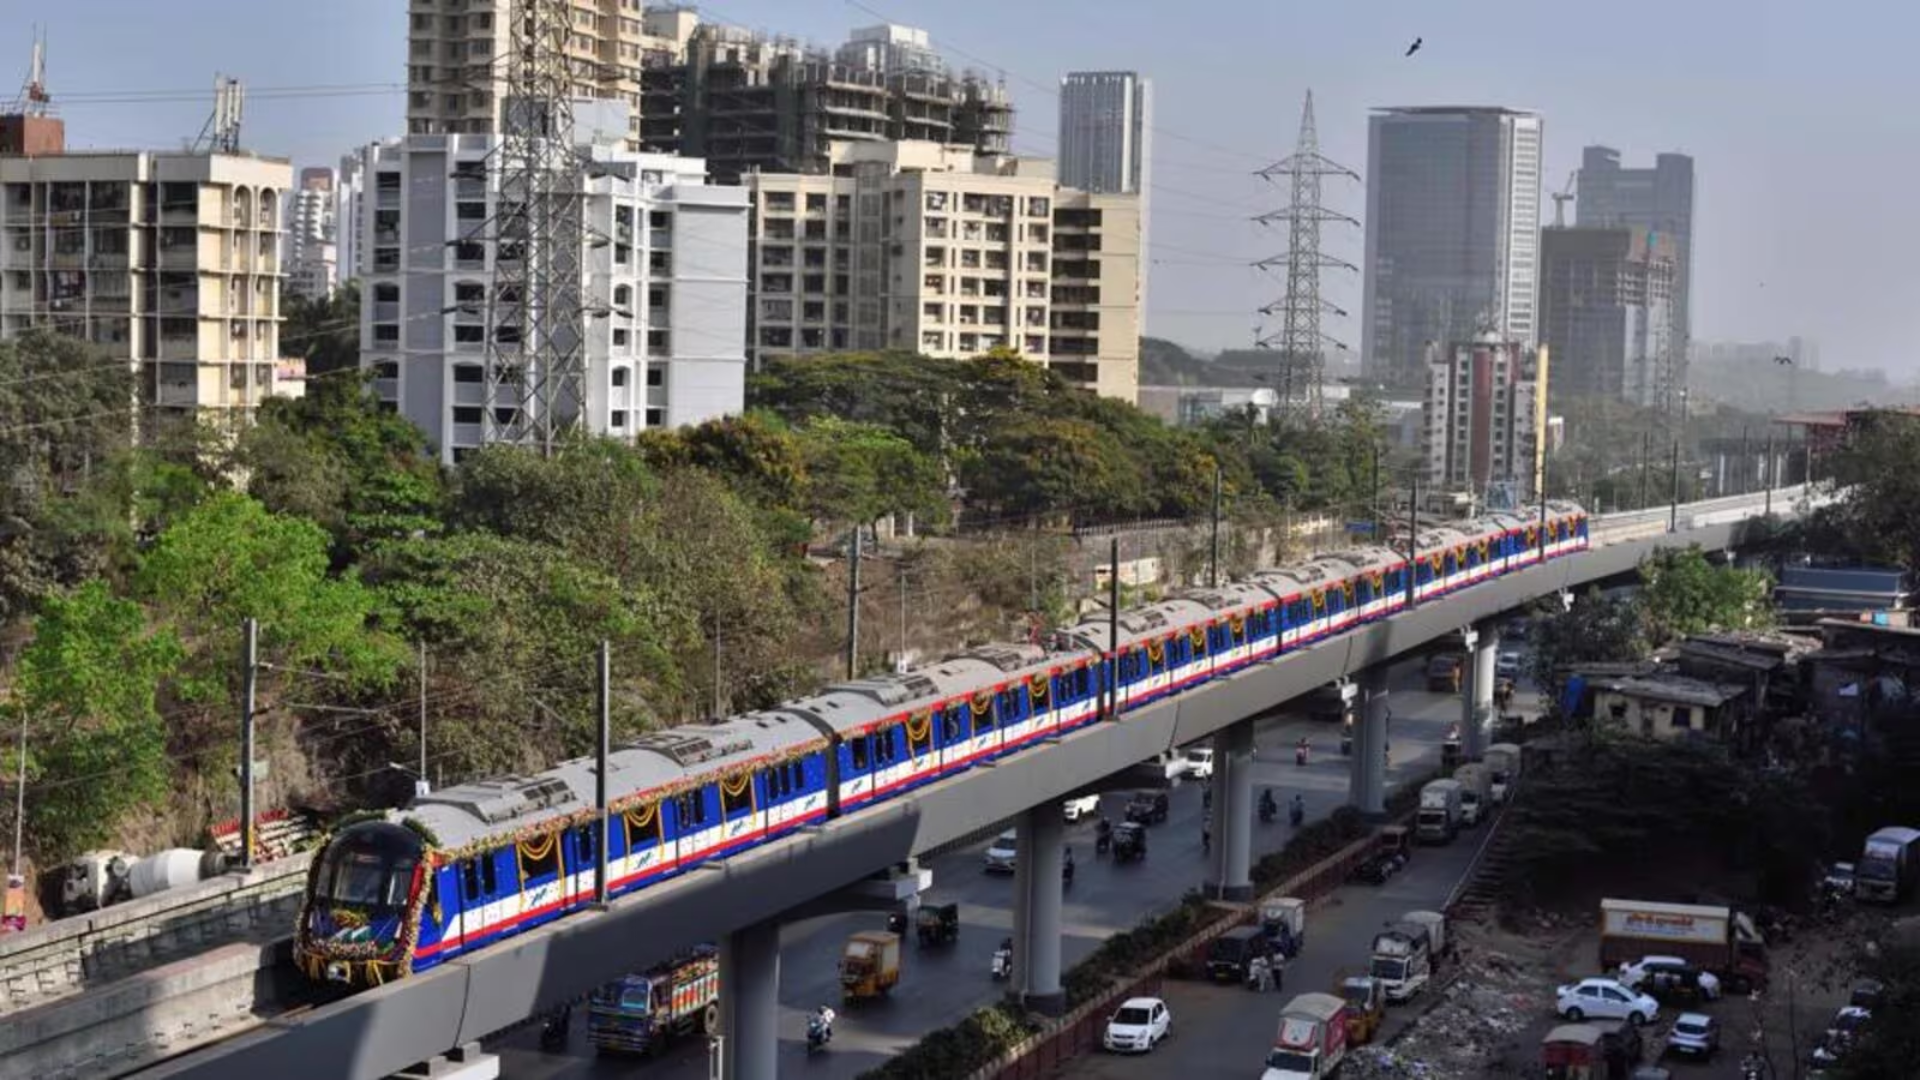 Mumbai Metro Services Temporarily Disrupted by Technical Glitch; Bunching Causes Minor Delays